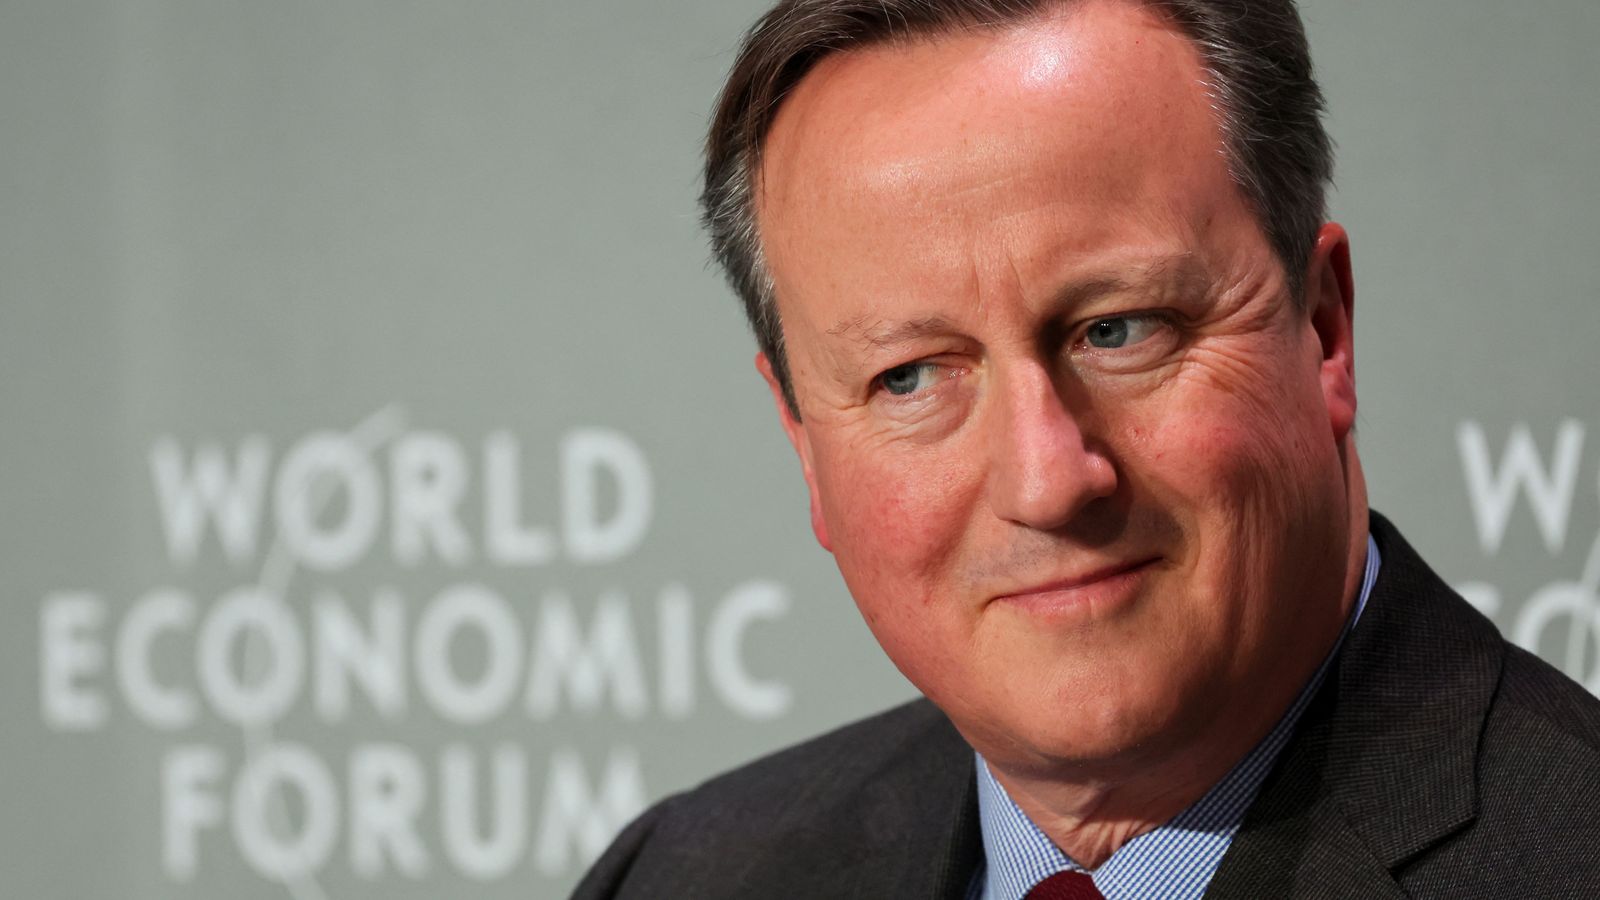 Lord David Cameron should be questioned by MPs in Commons, committee suggests